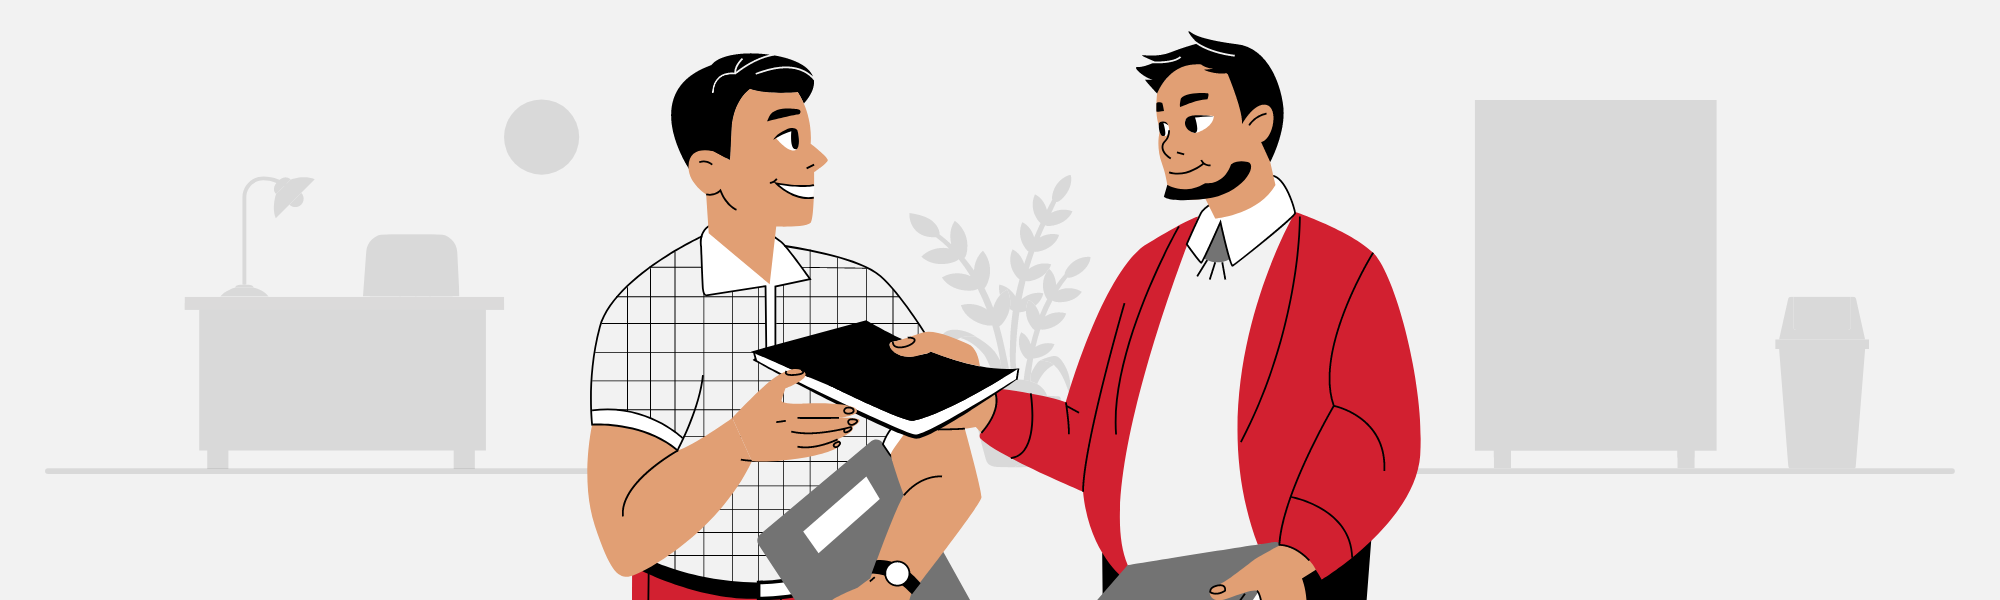 web banner, illustration of a member handing a book to another member 